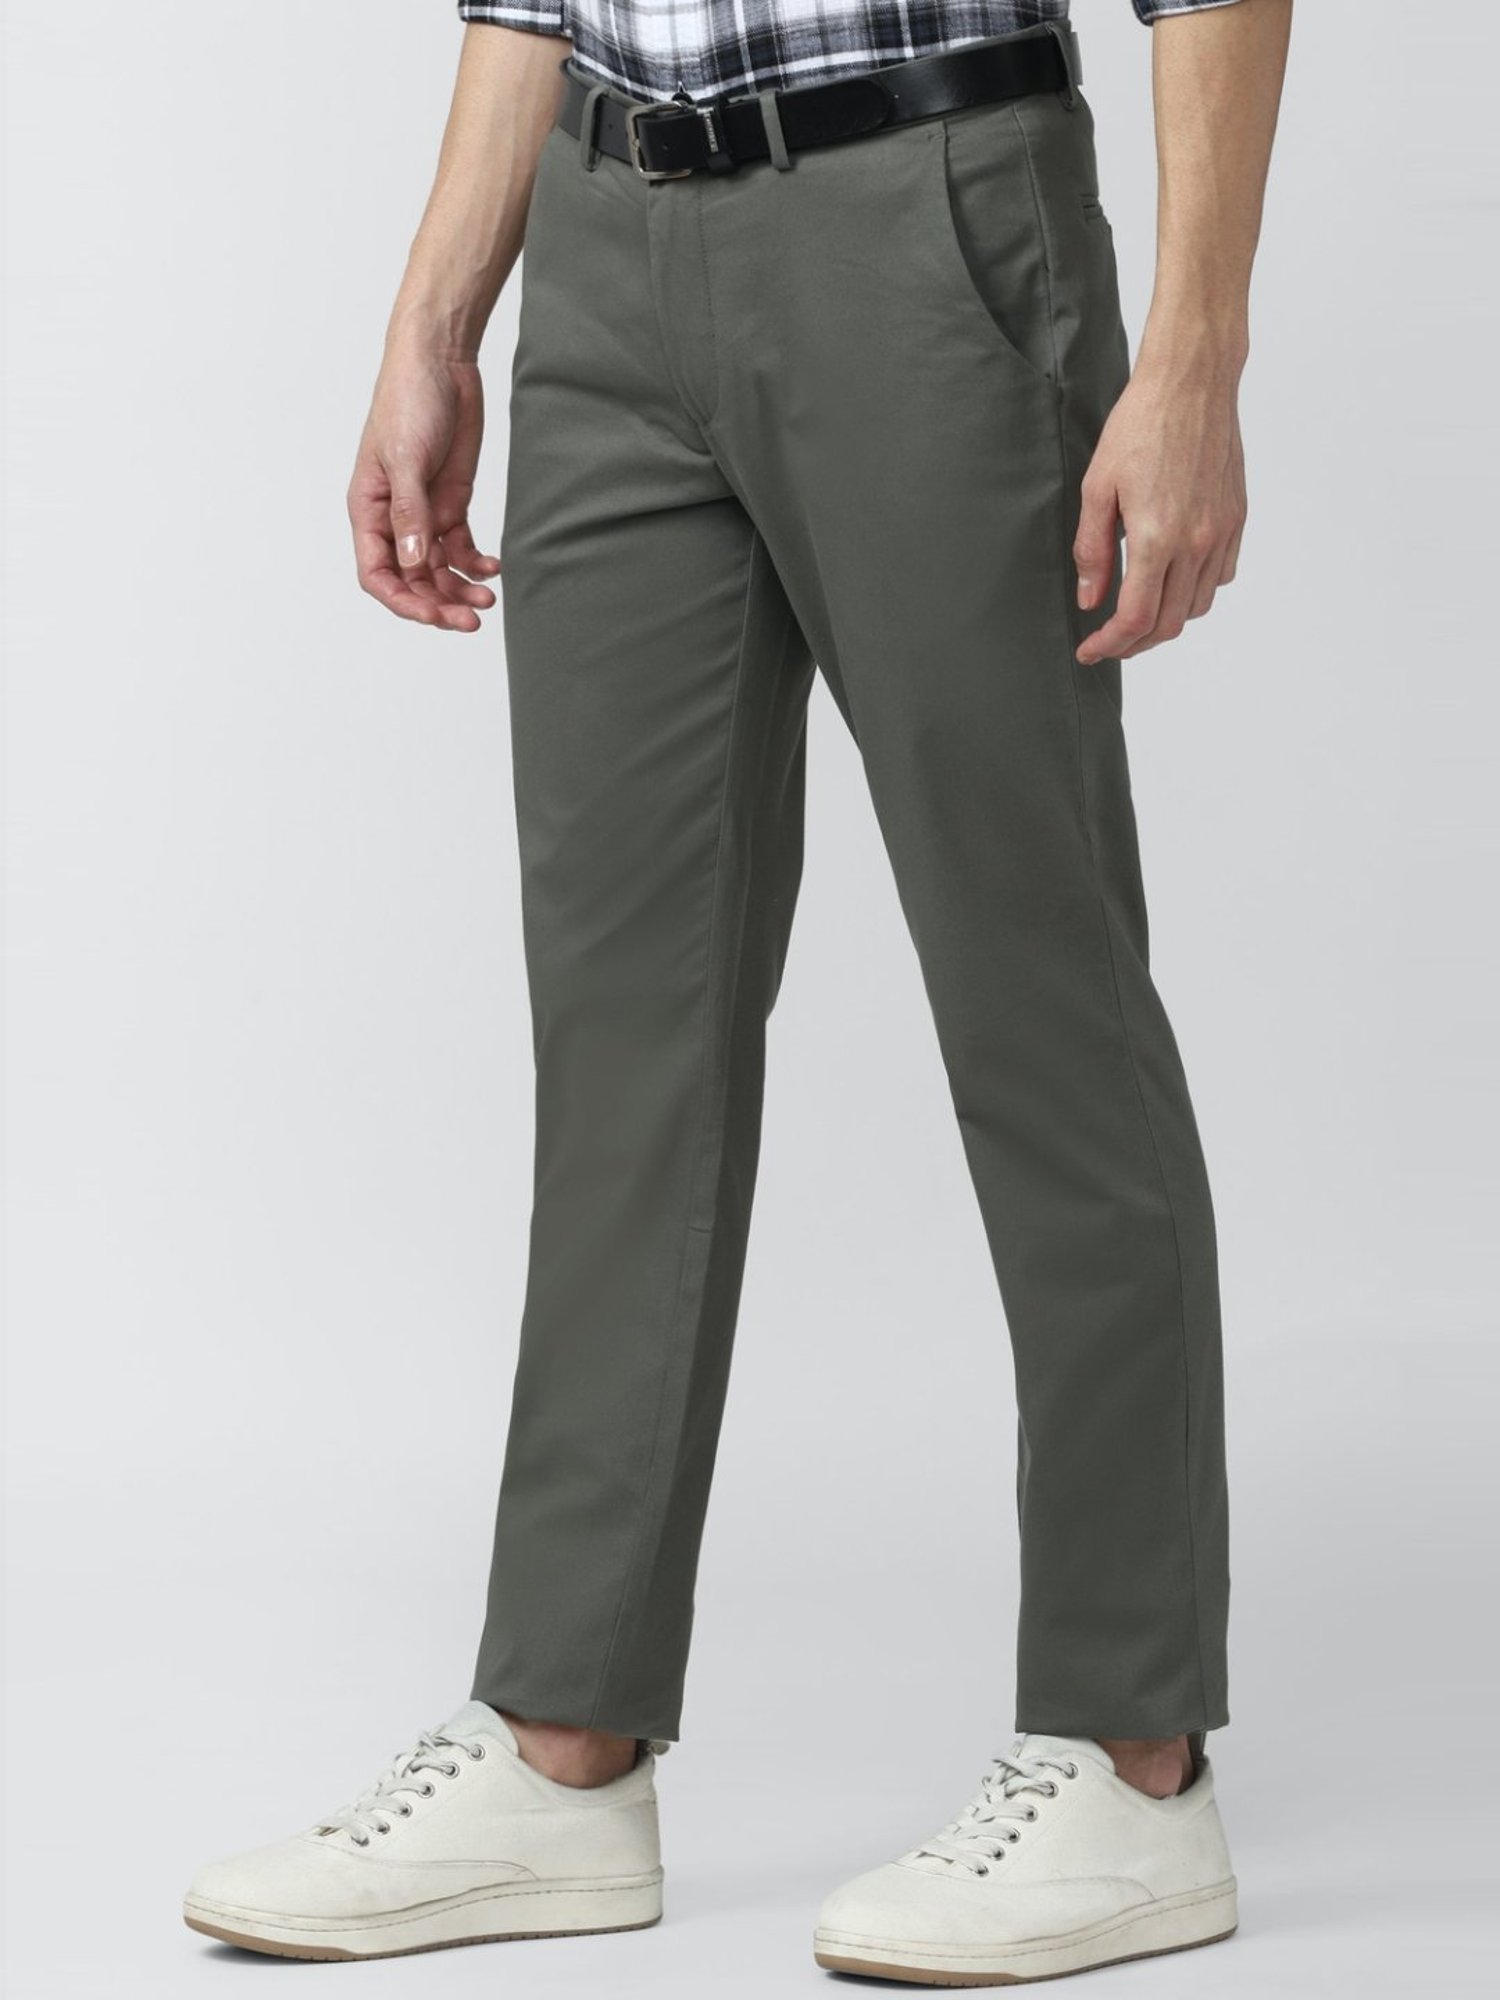 Buy Peter England Elite Formal Trousers online  Men  50 products   FASHIOLAin